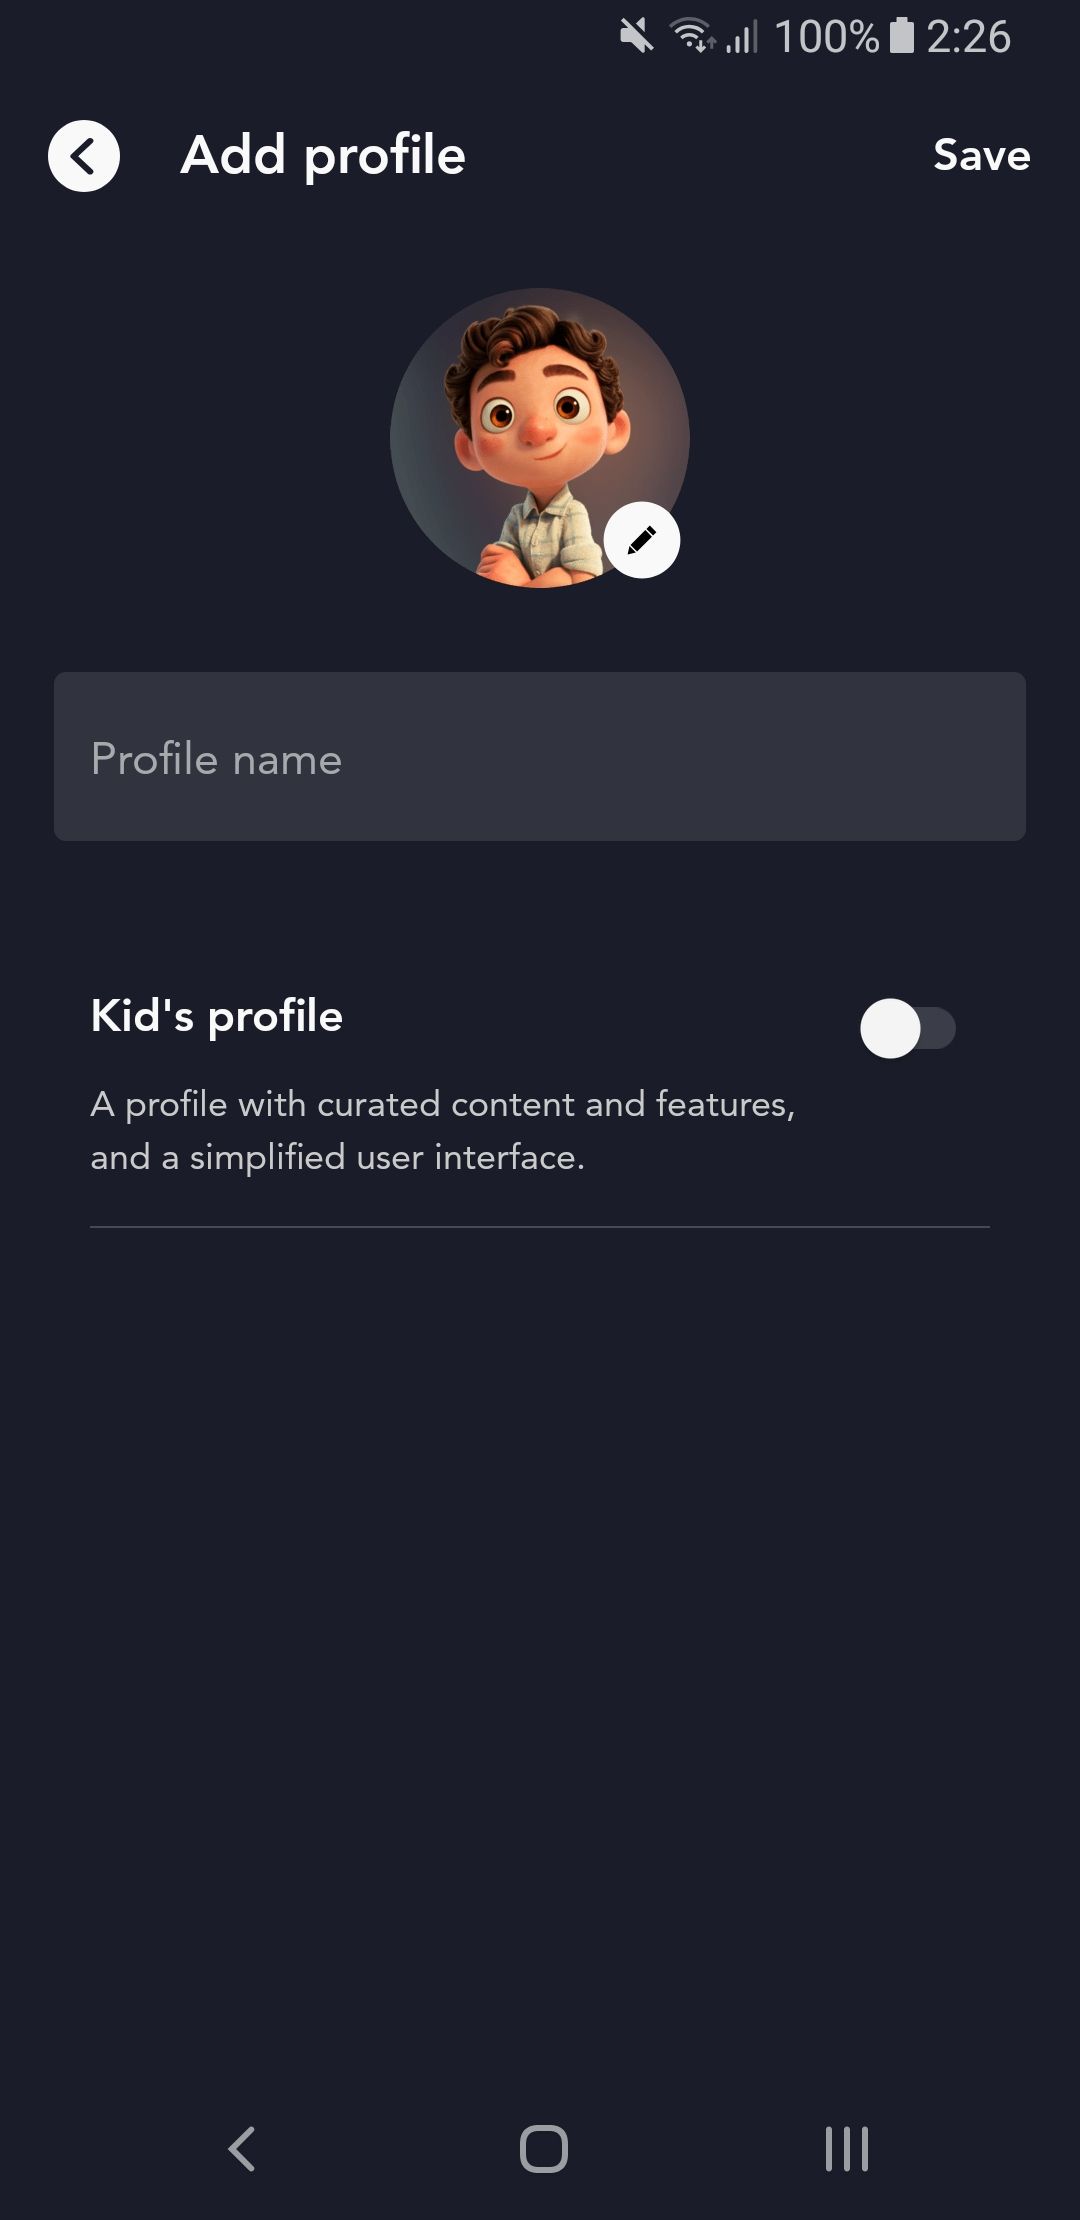 A screenshot of the Disney+ app showing the 'add profile' screen